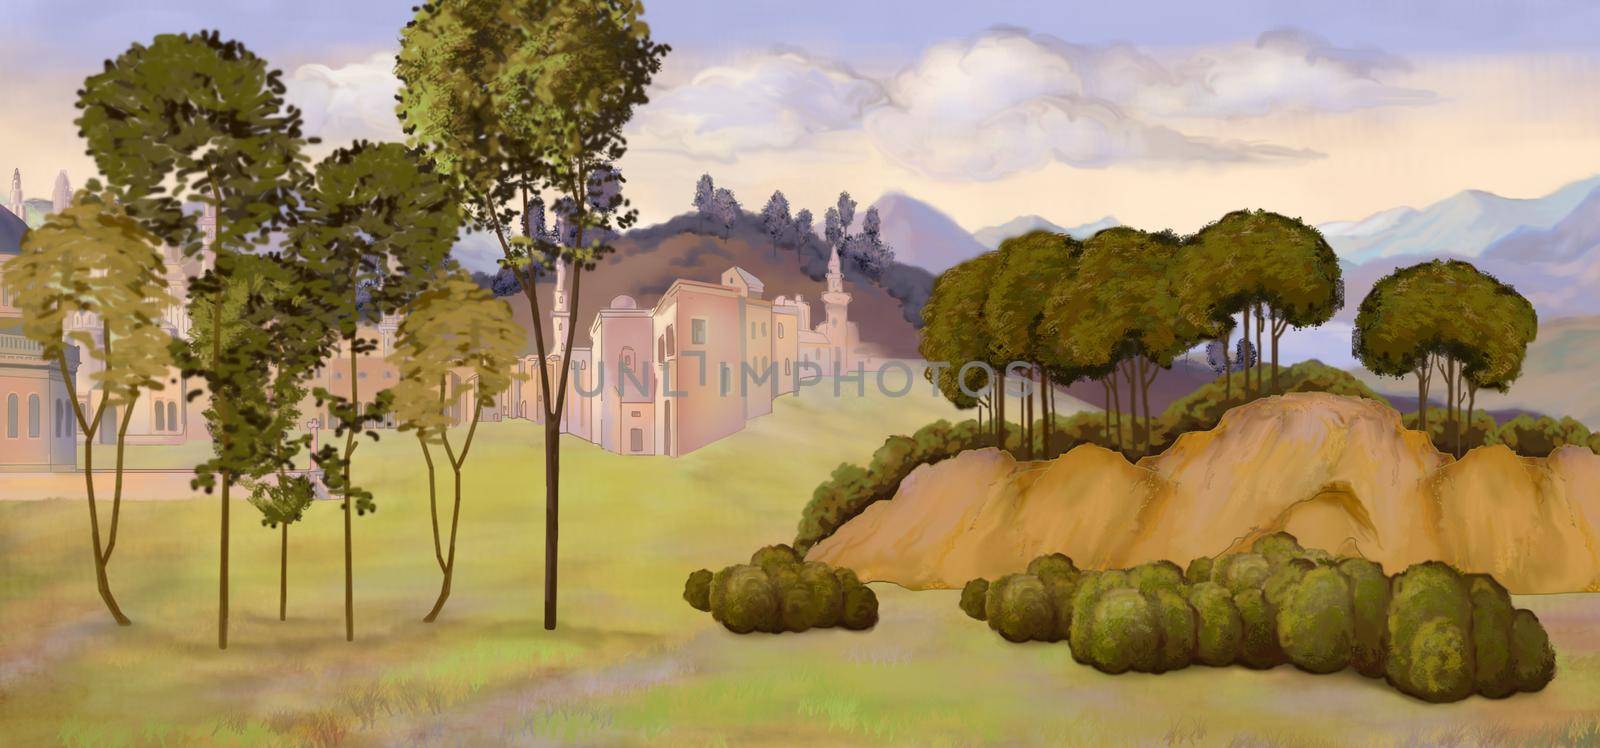 Italian landscape in the style of Vittore Carpaccio. Digital Painting Background, Illustration.